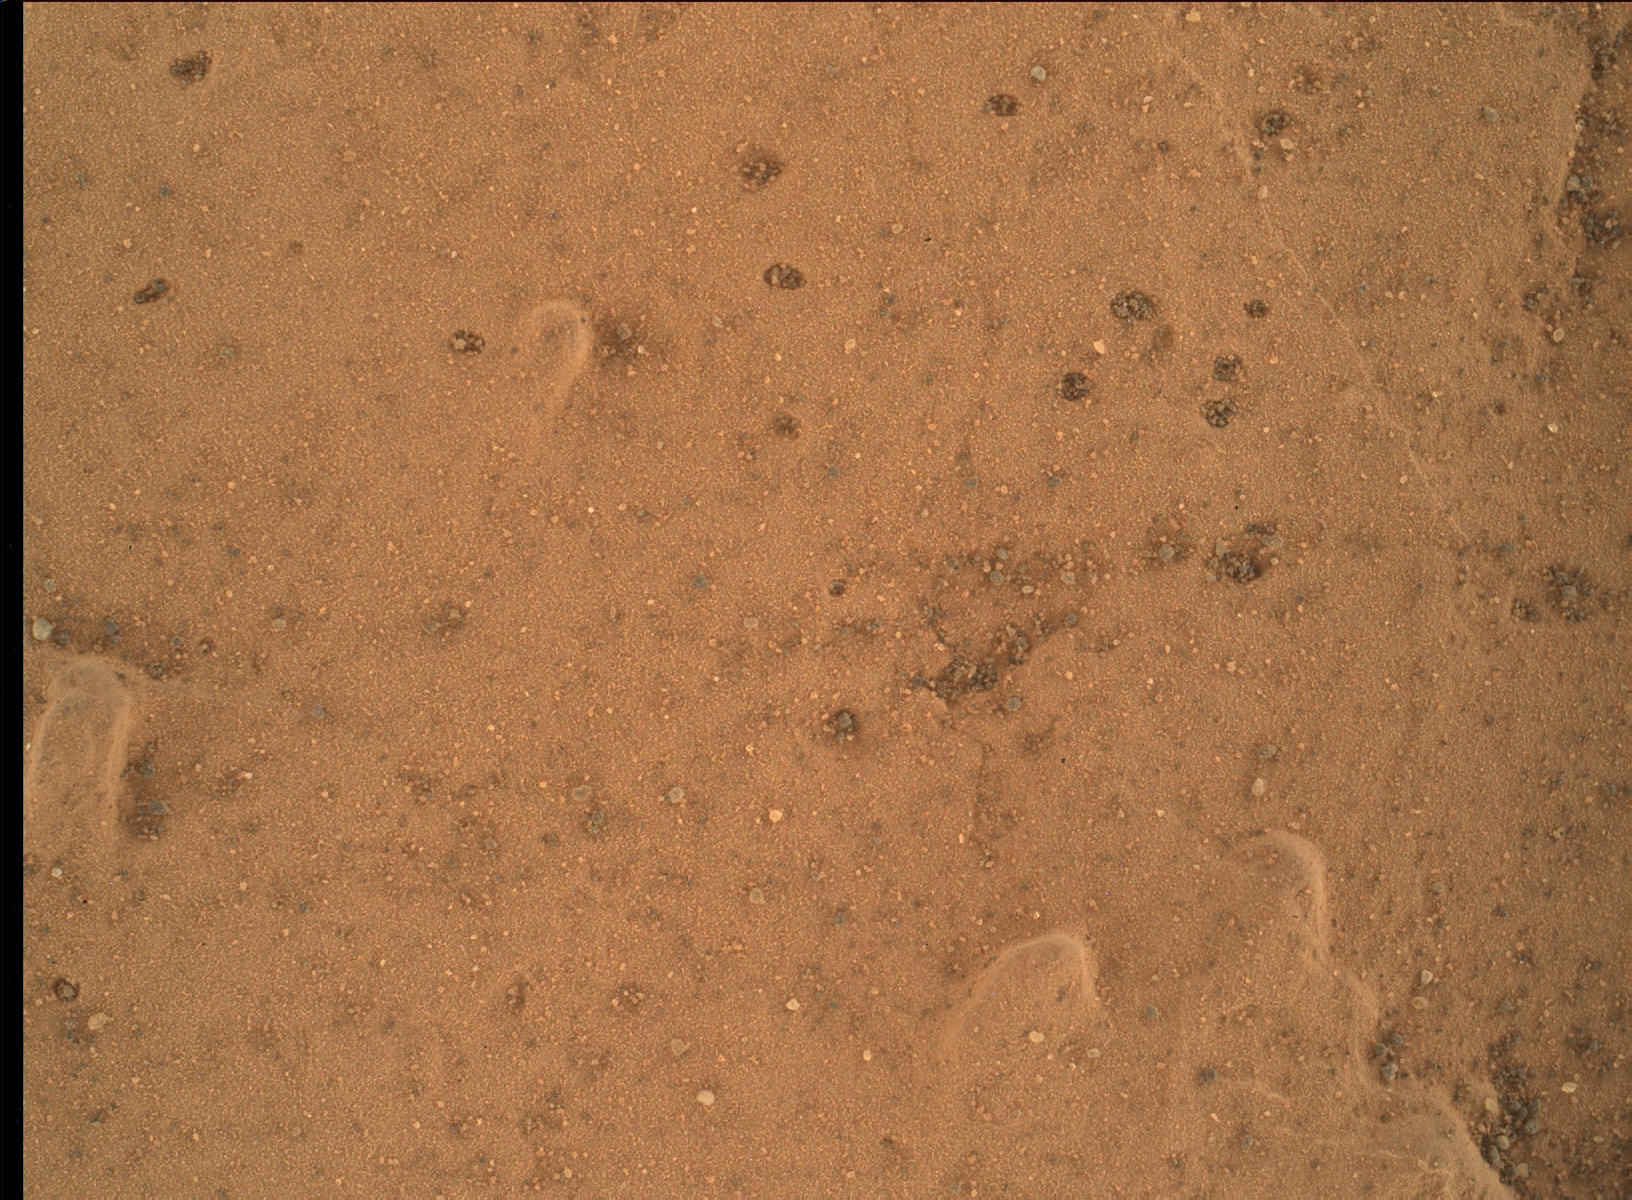 Nasa's Mars rover Curiosity acquired this image using its Mars Hand Lens Imager (MAHLI) on Sol 1809